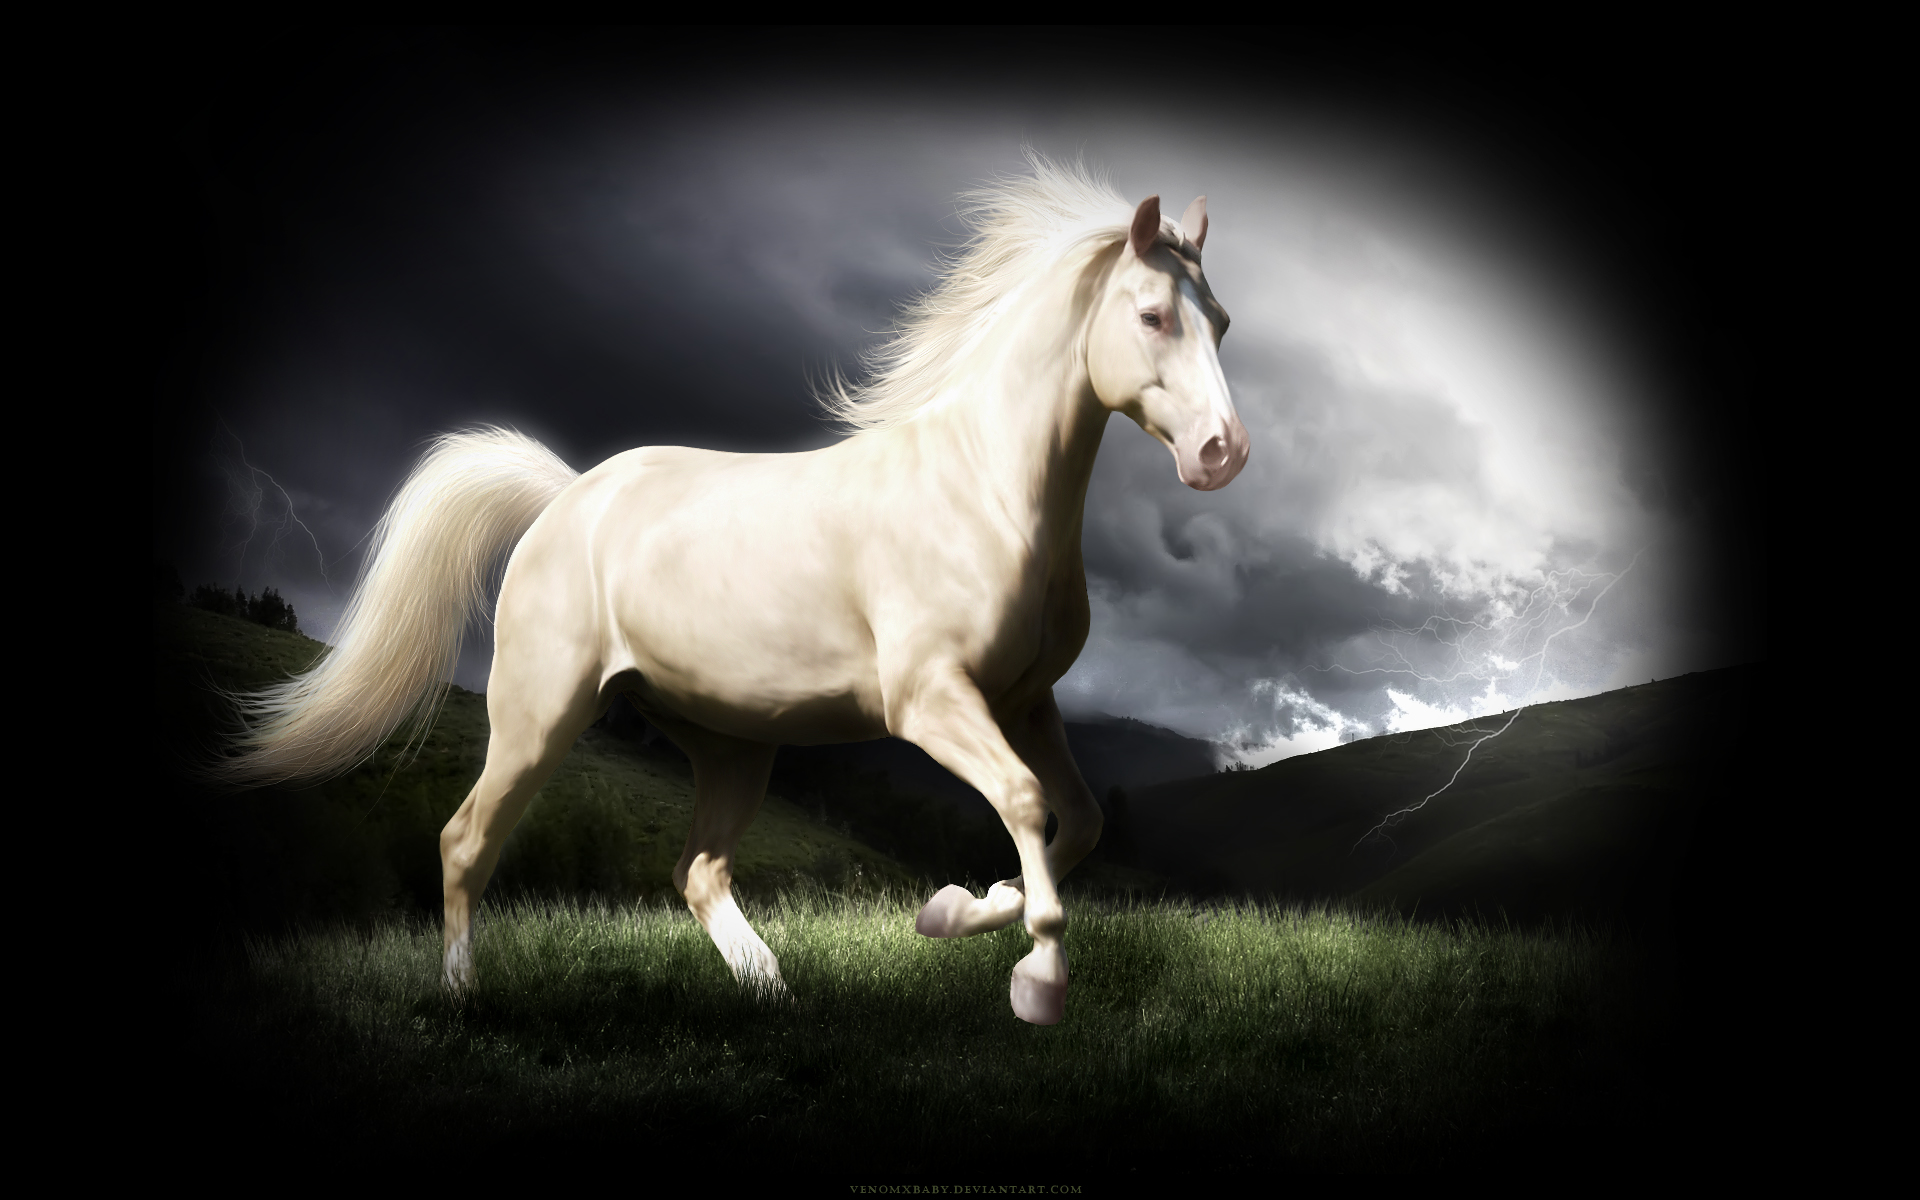 [77+] Horse Backgrounds For Your Computer on WallpaperSafari